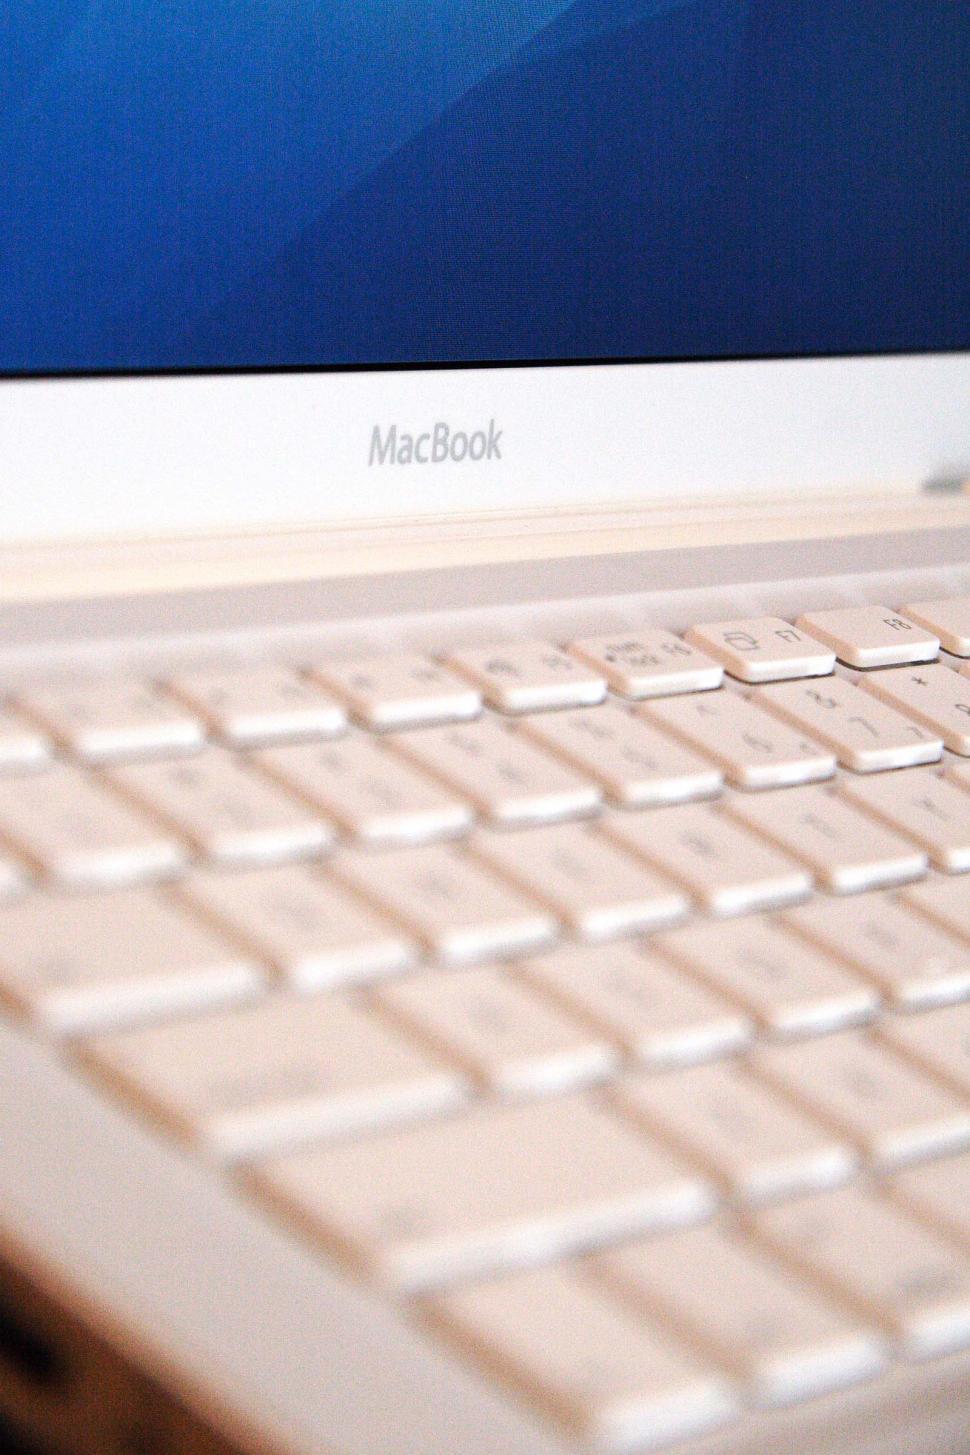 Free Image of Close Up of a MacBook on a Desk 